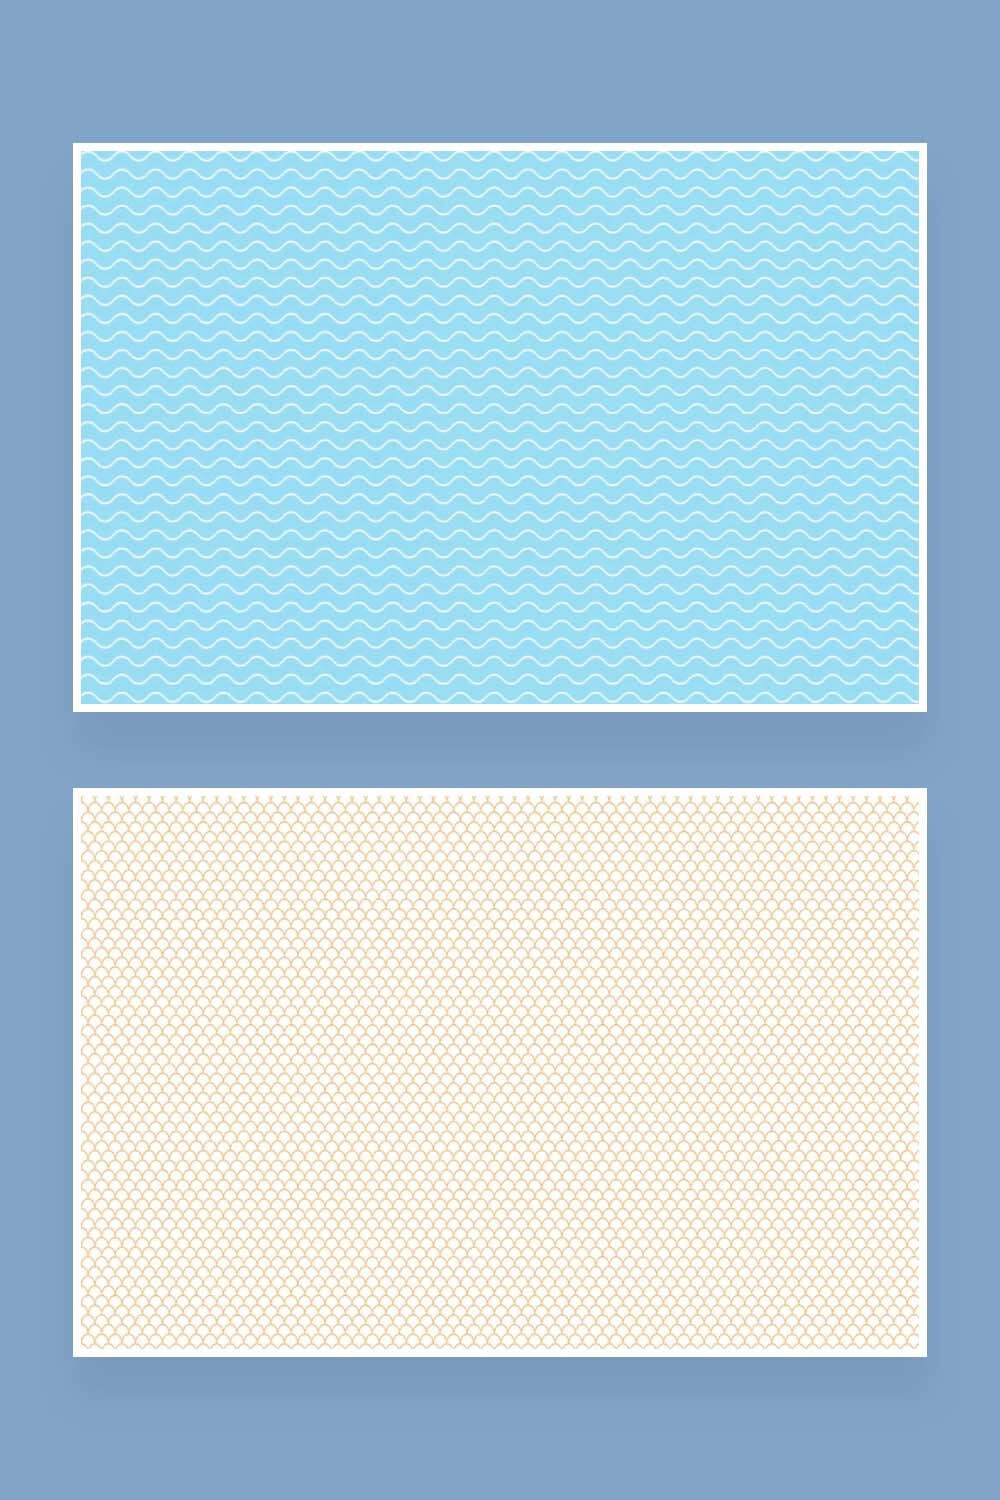 Two samples in blue and beige with different geometric patterns.